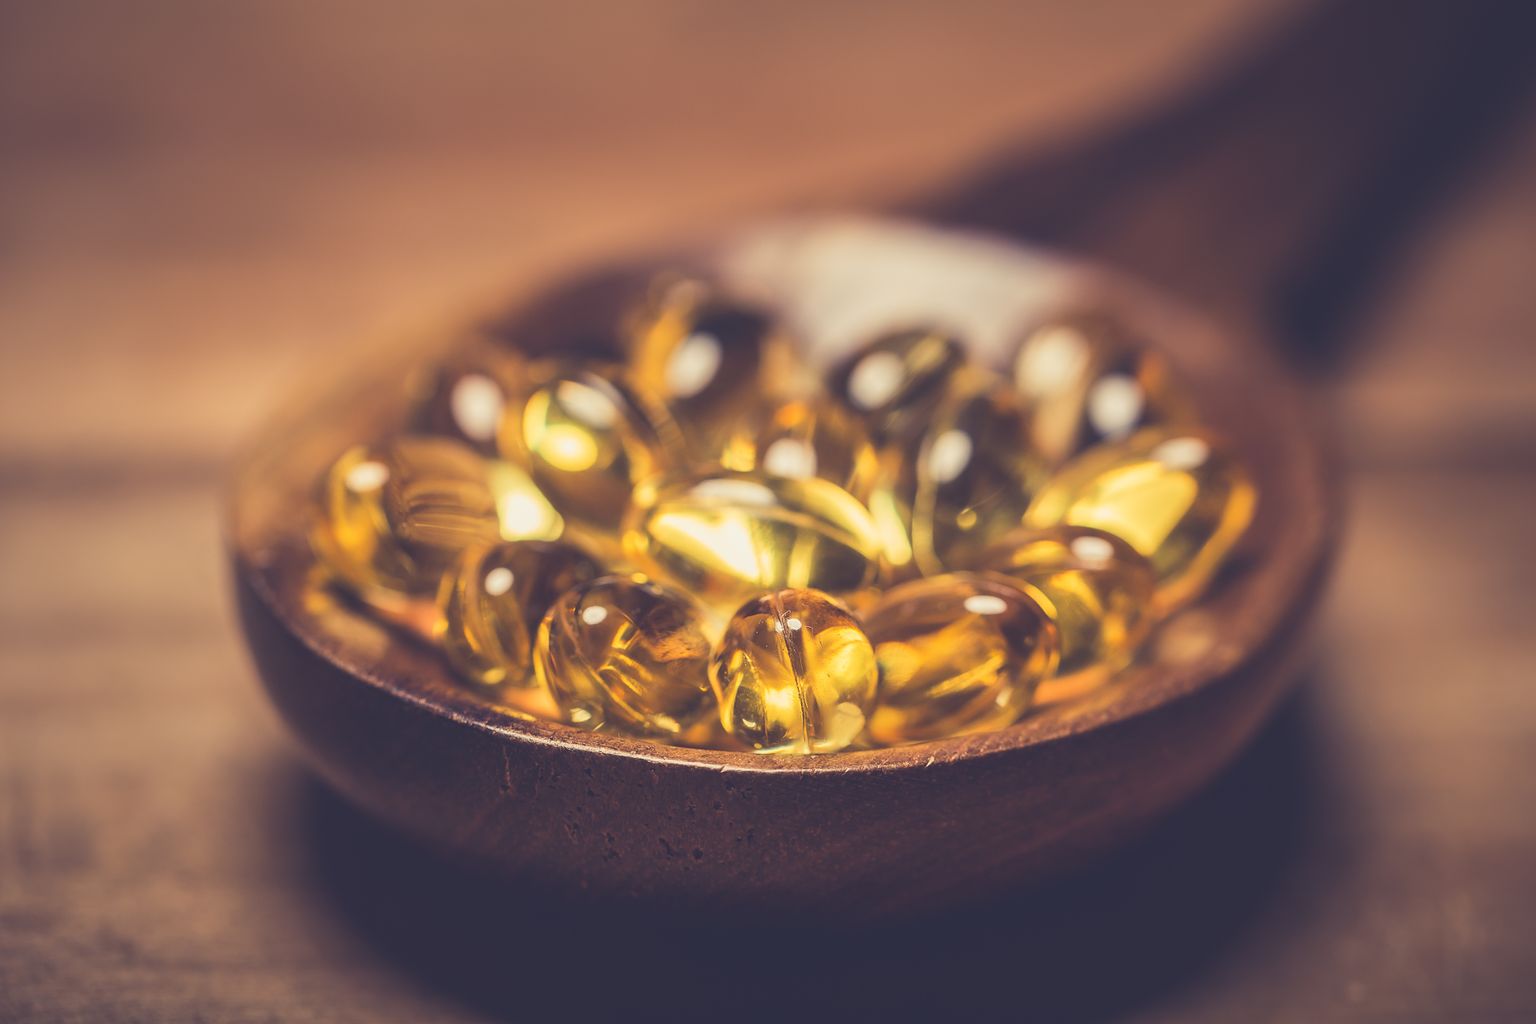 Vitamin D capsules in a wooden spoon on a wooden table.